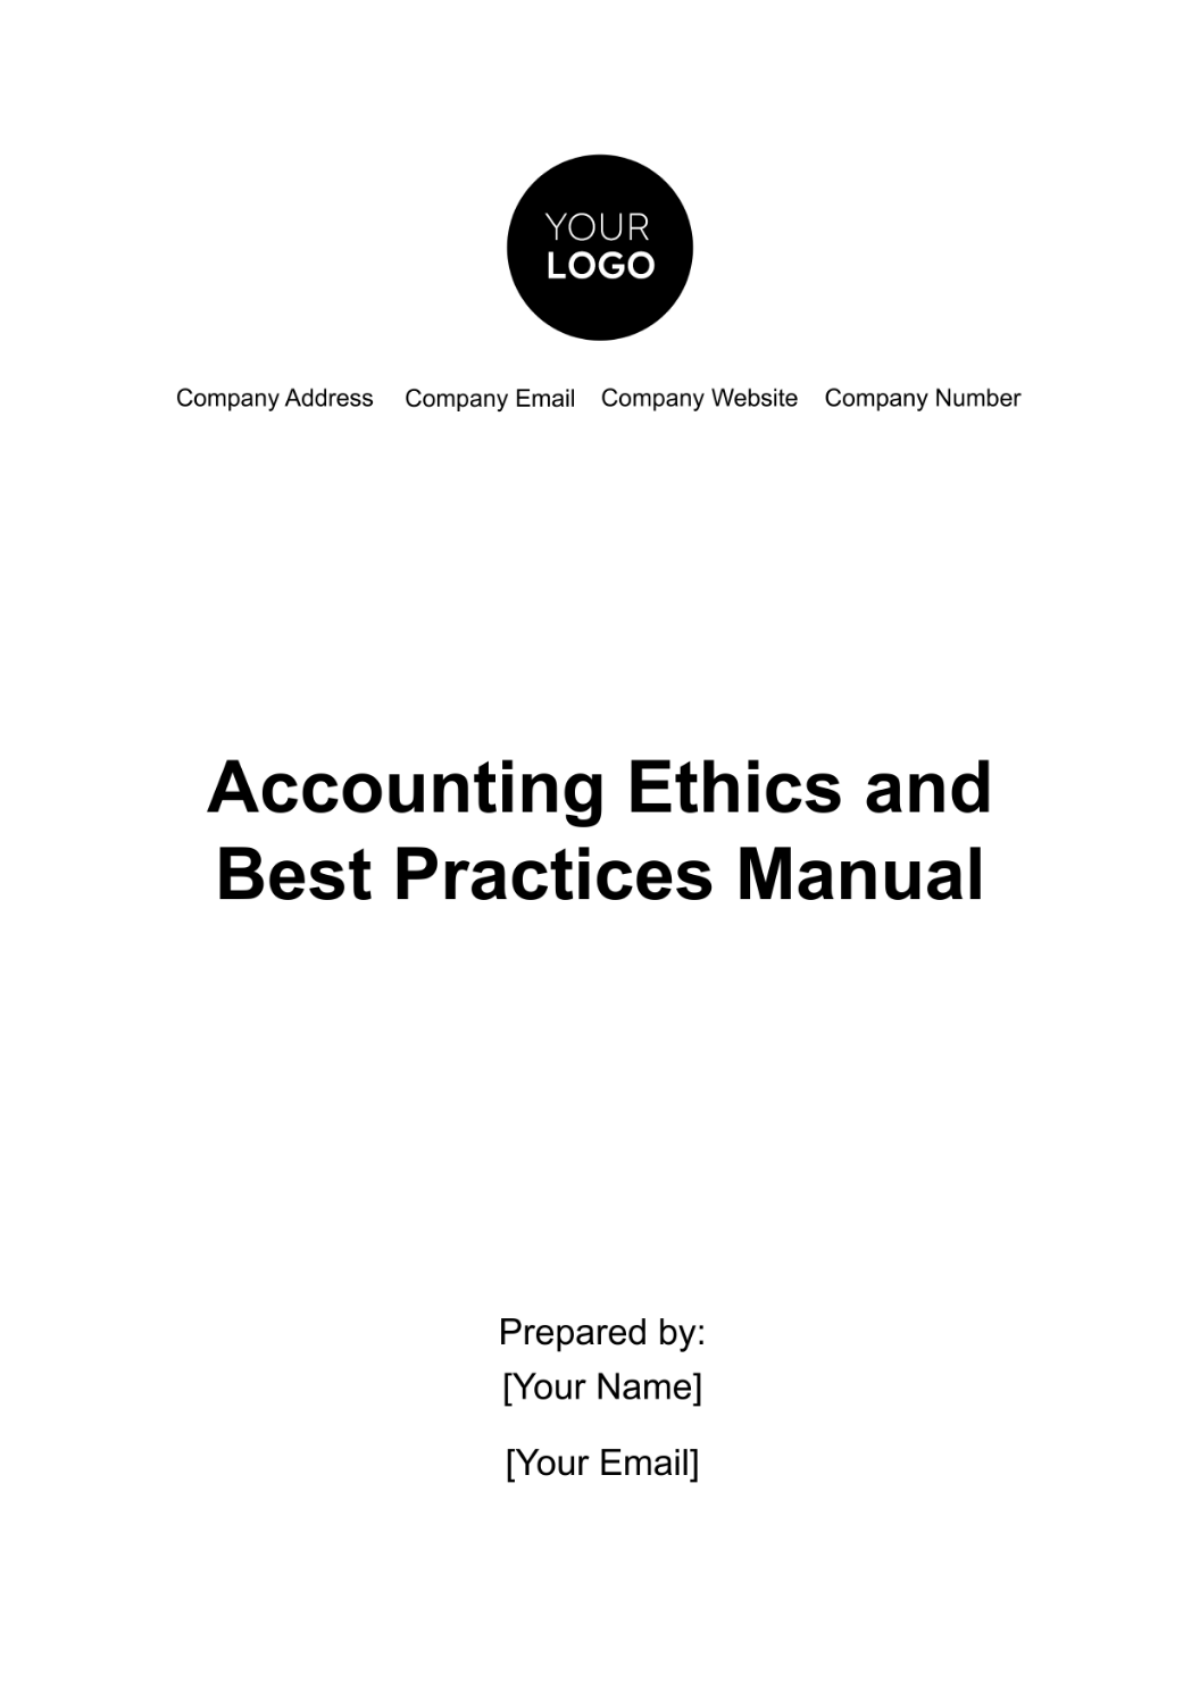 Accounting Ethics and Best Practices Manual Template